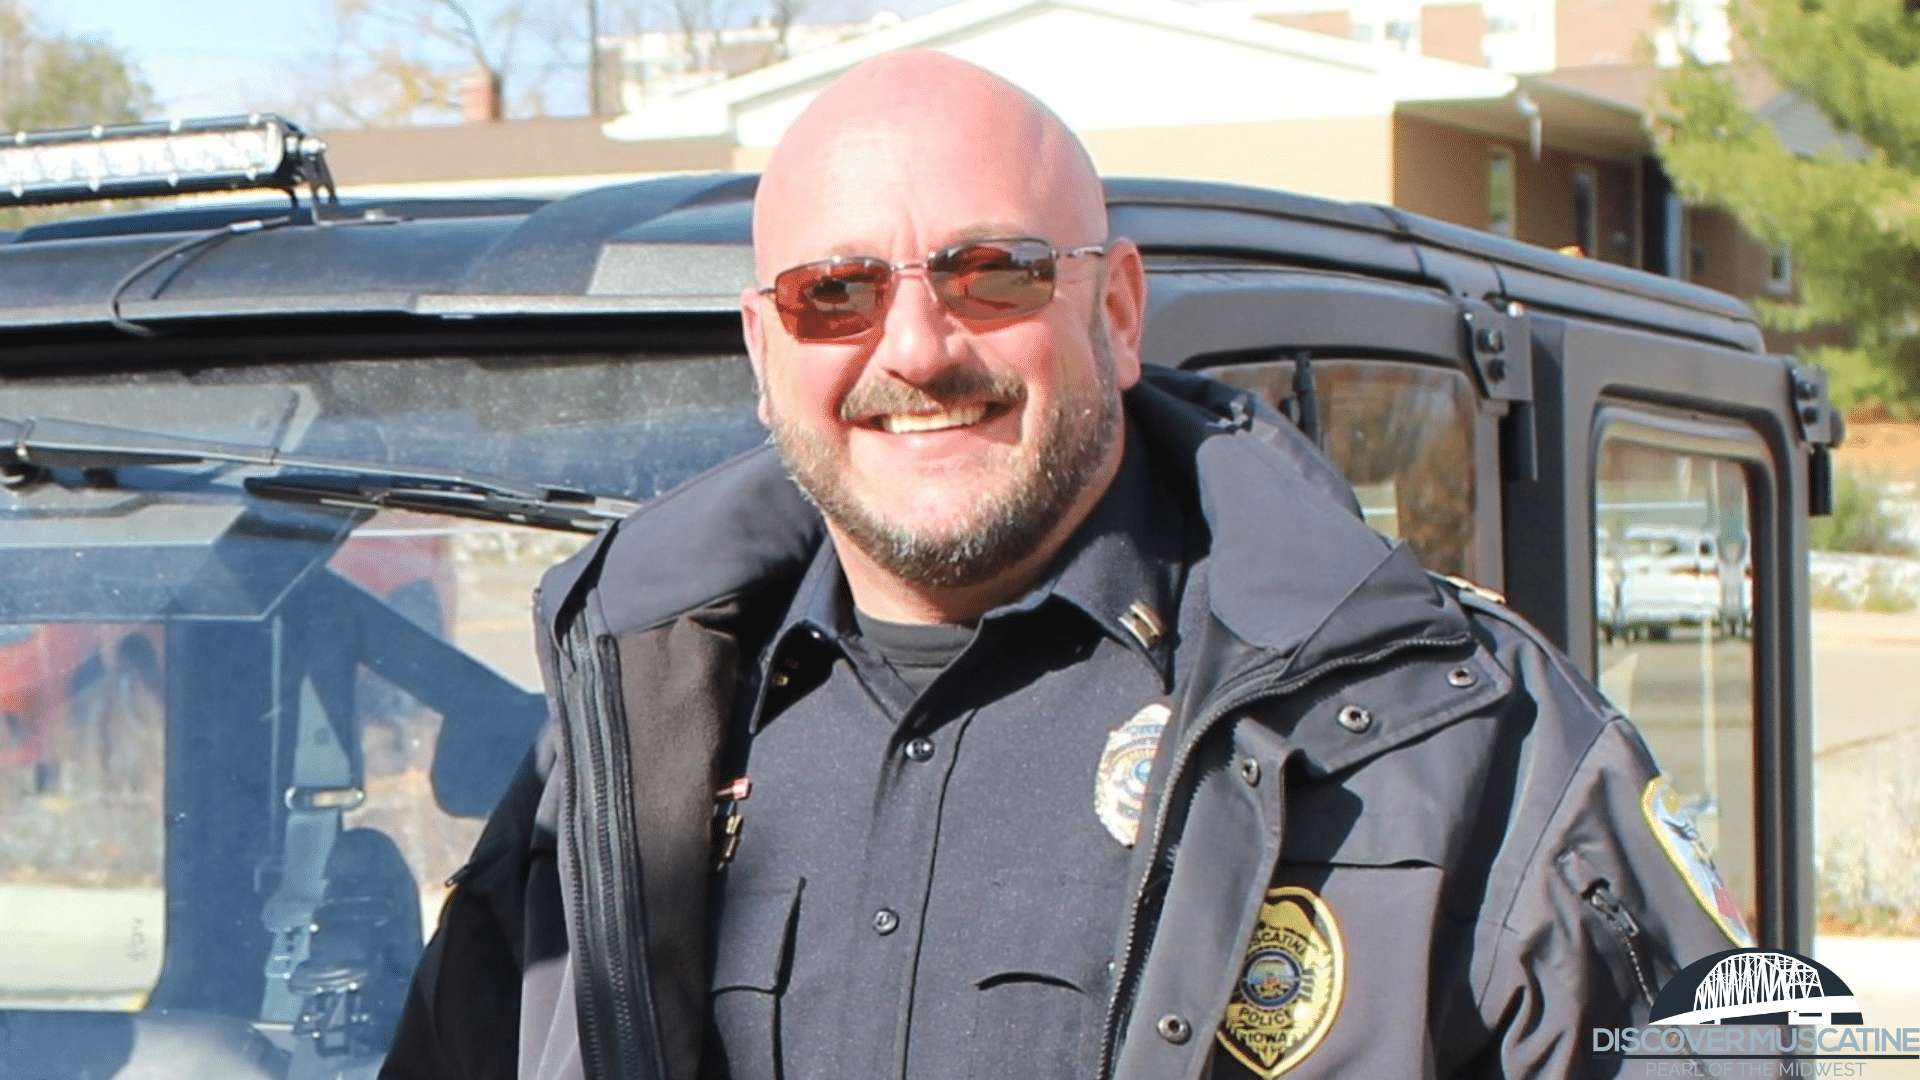 Tony Kies selected as next Muscatine police chief